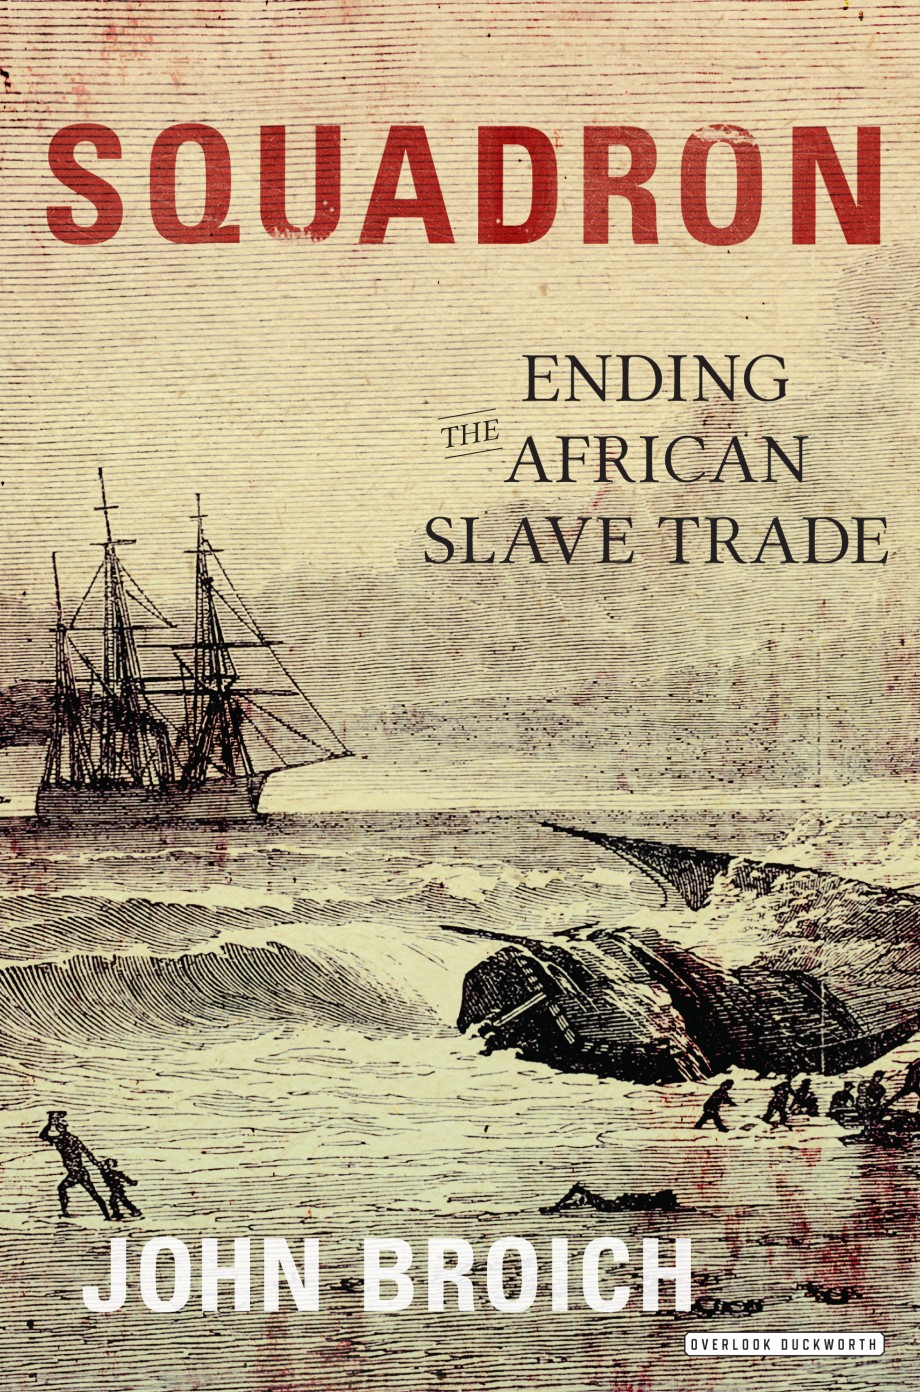 Squadron Ending the African Slave Trade